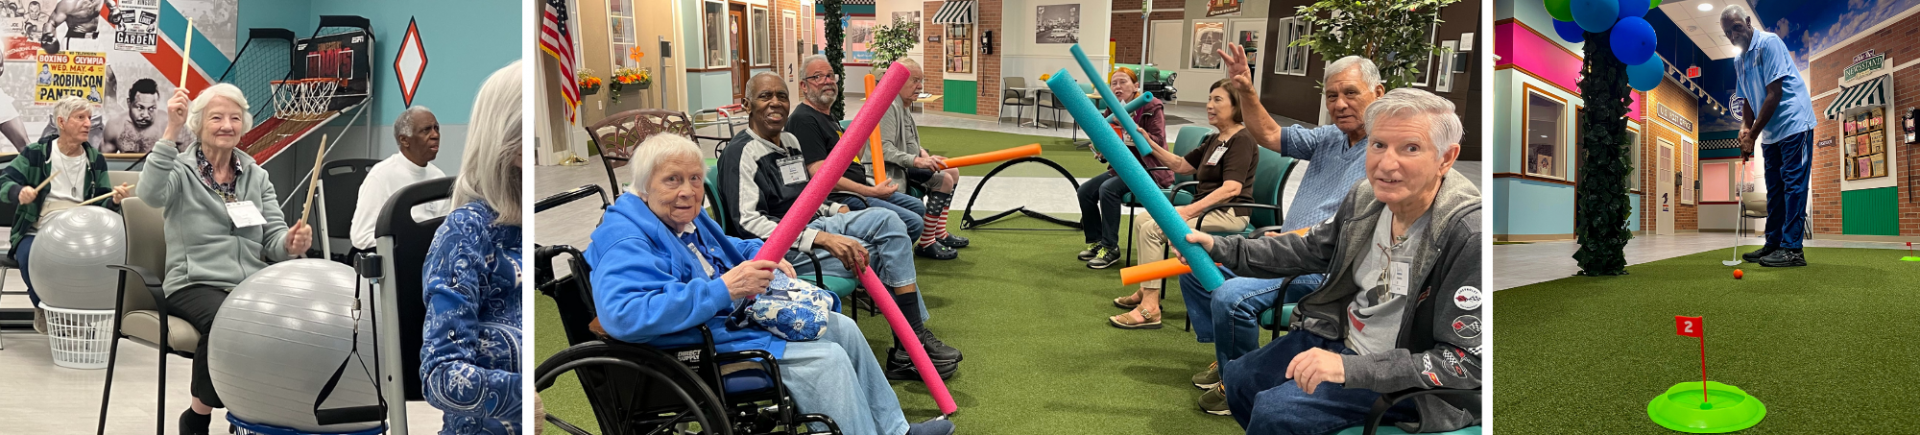 Senior Fitness Reimagined: Discovering Joyful Movement at Town Square NW Austin